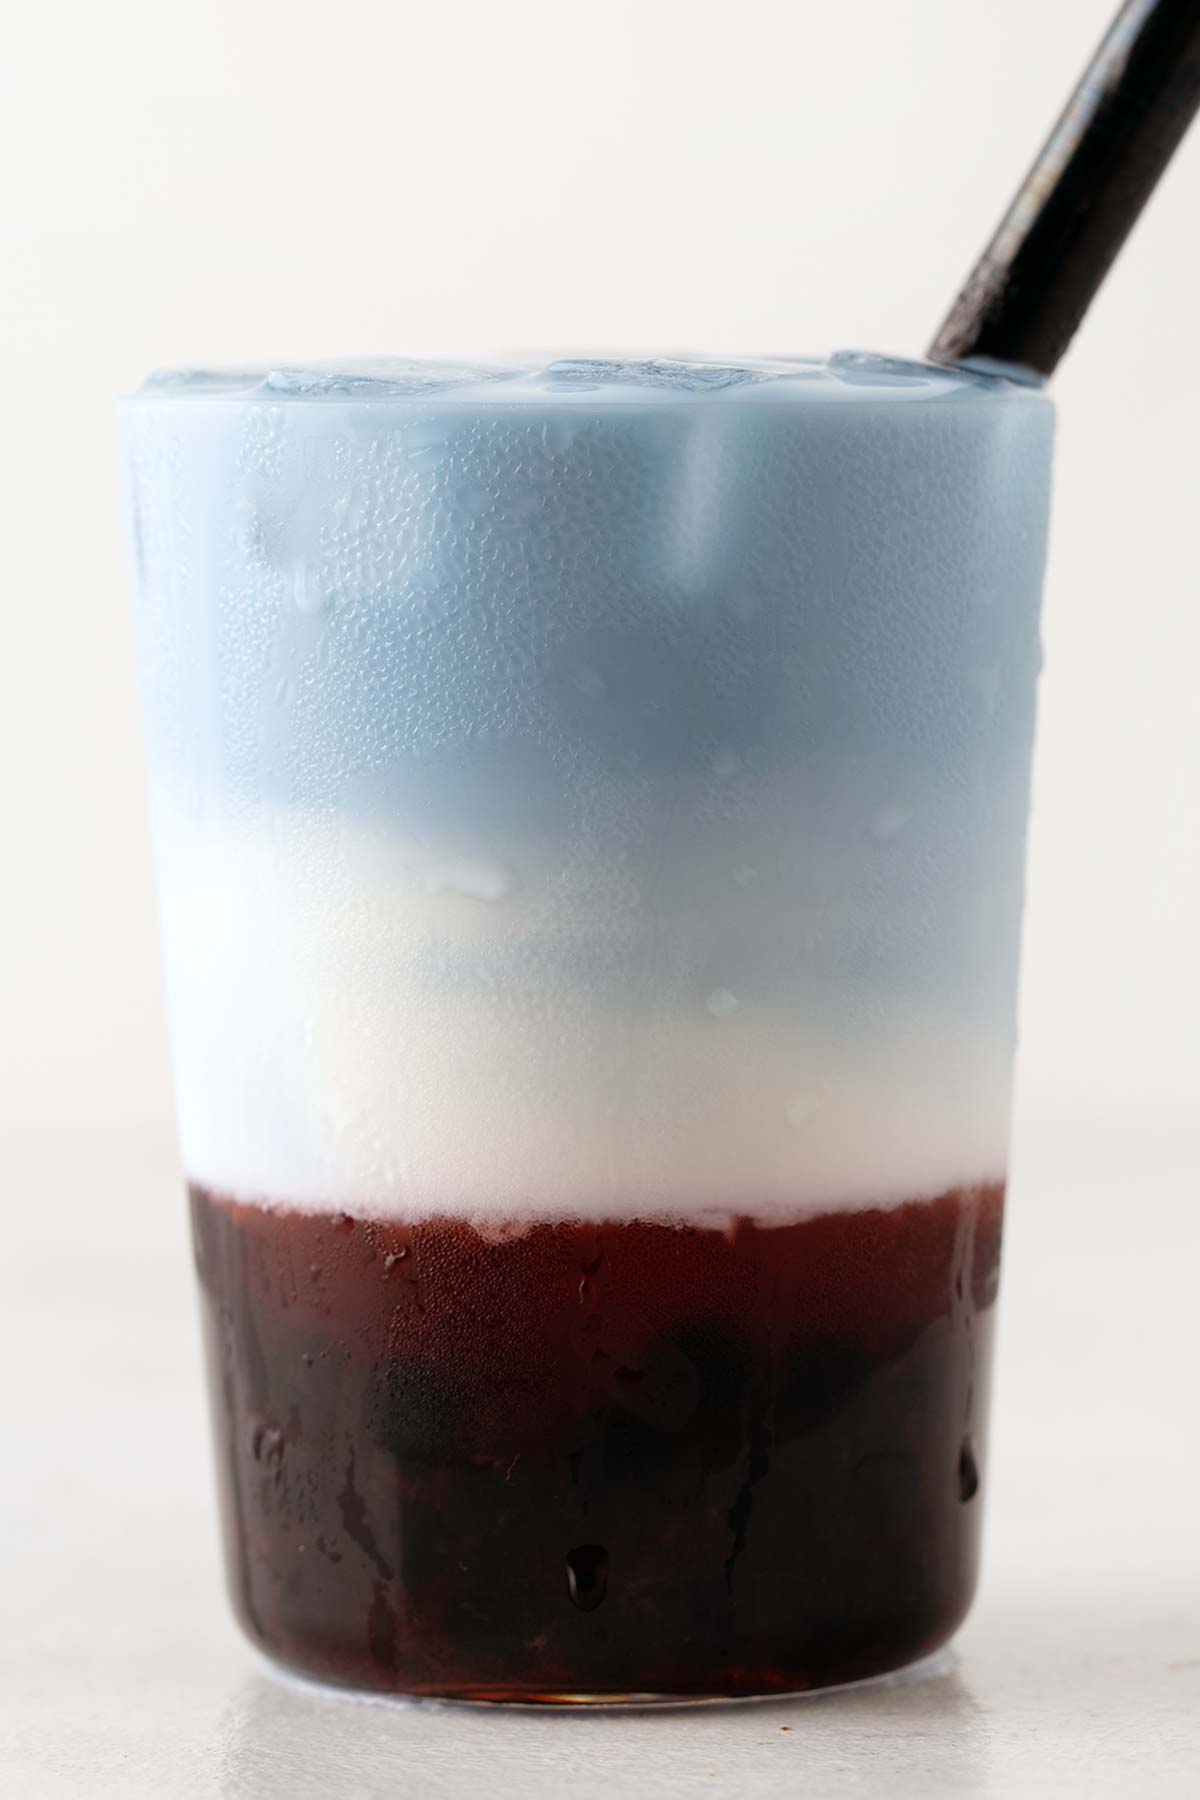 Strawberry and Butterfly Pea Flower Latte Bubble Tea fully layered in red, white, and blue.